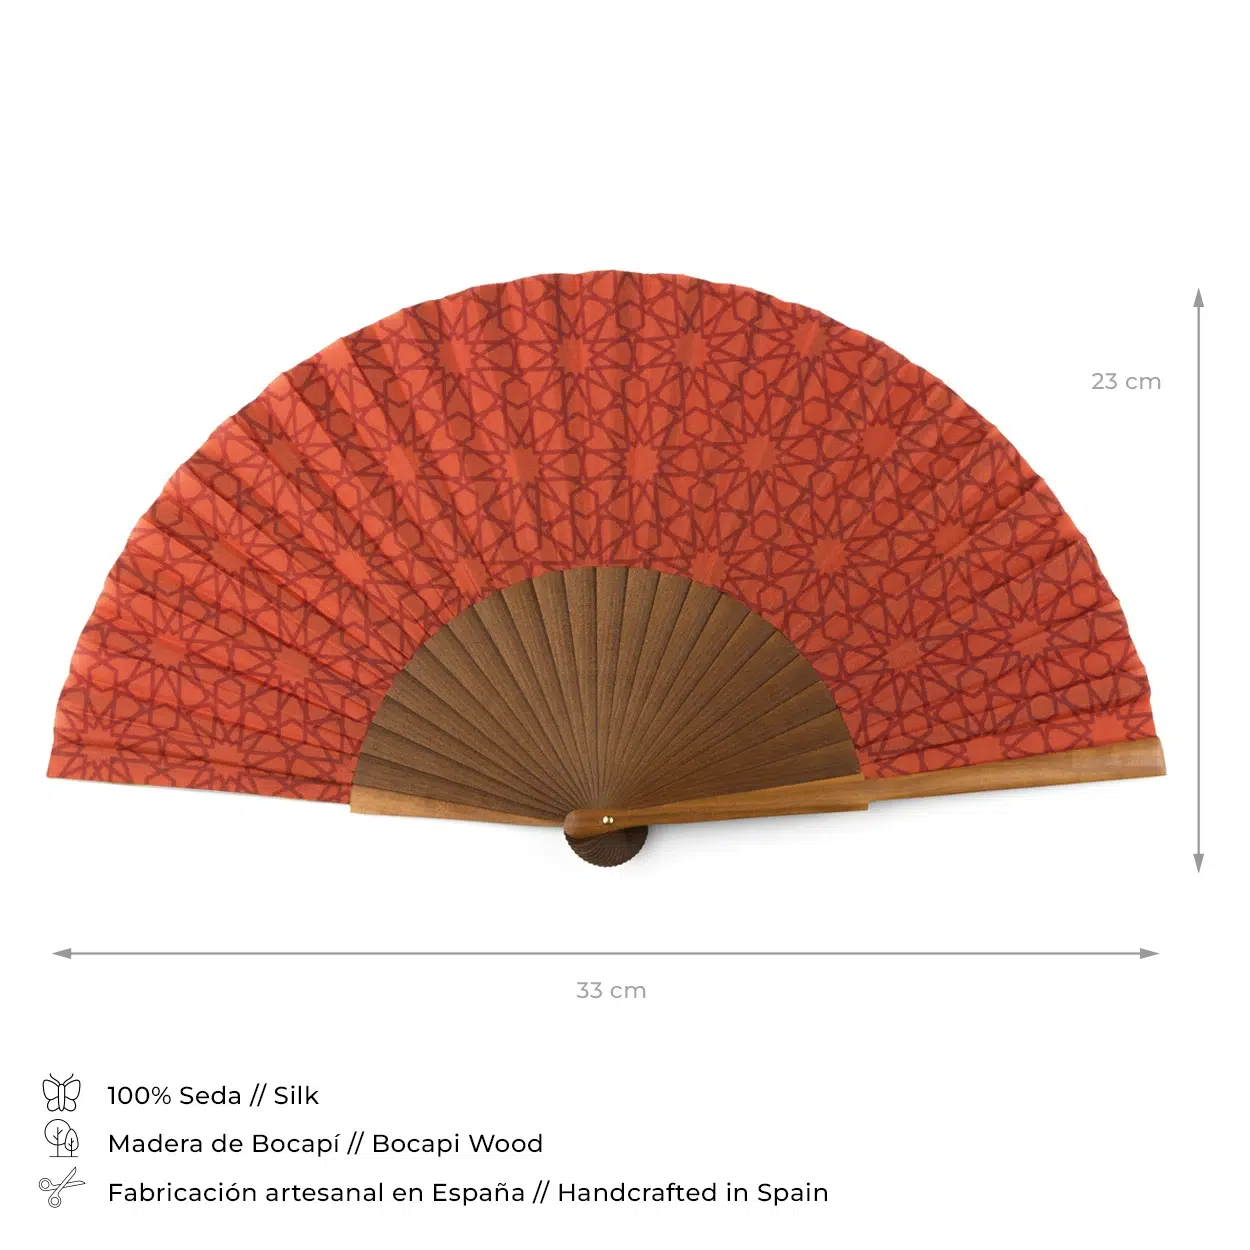 Red Silk Fan with Dark Wood and Print Inspired by Islamic Art.